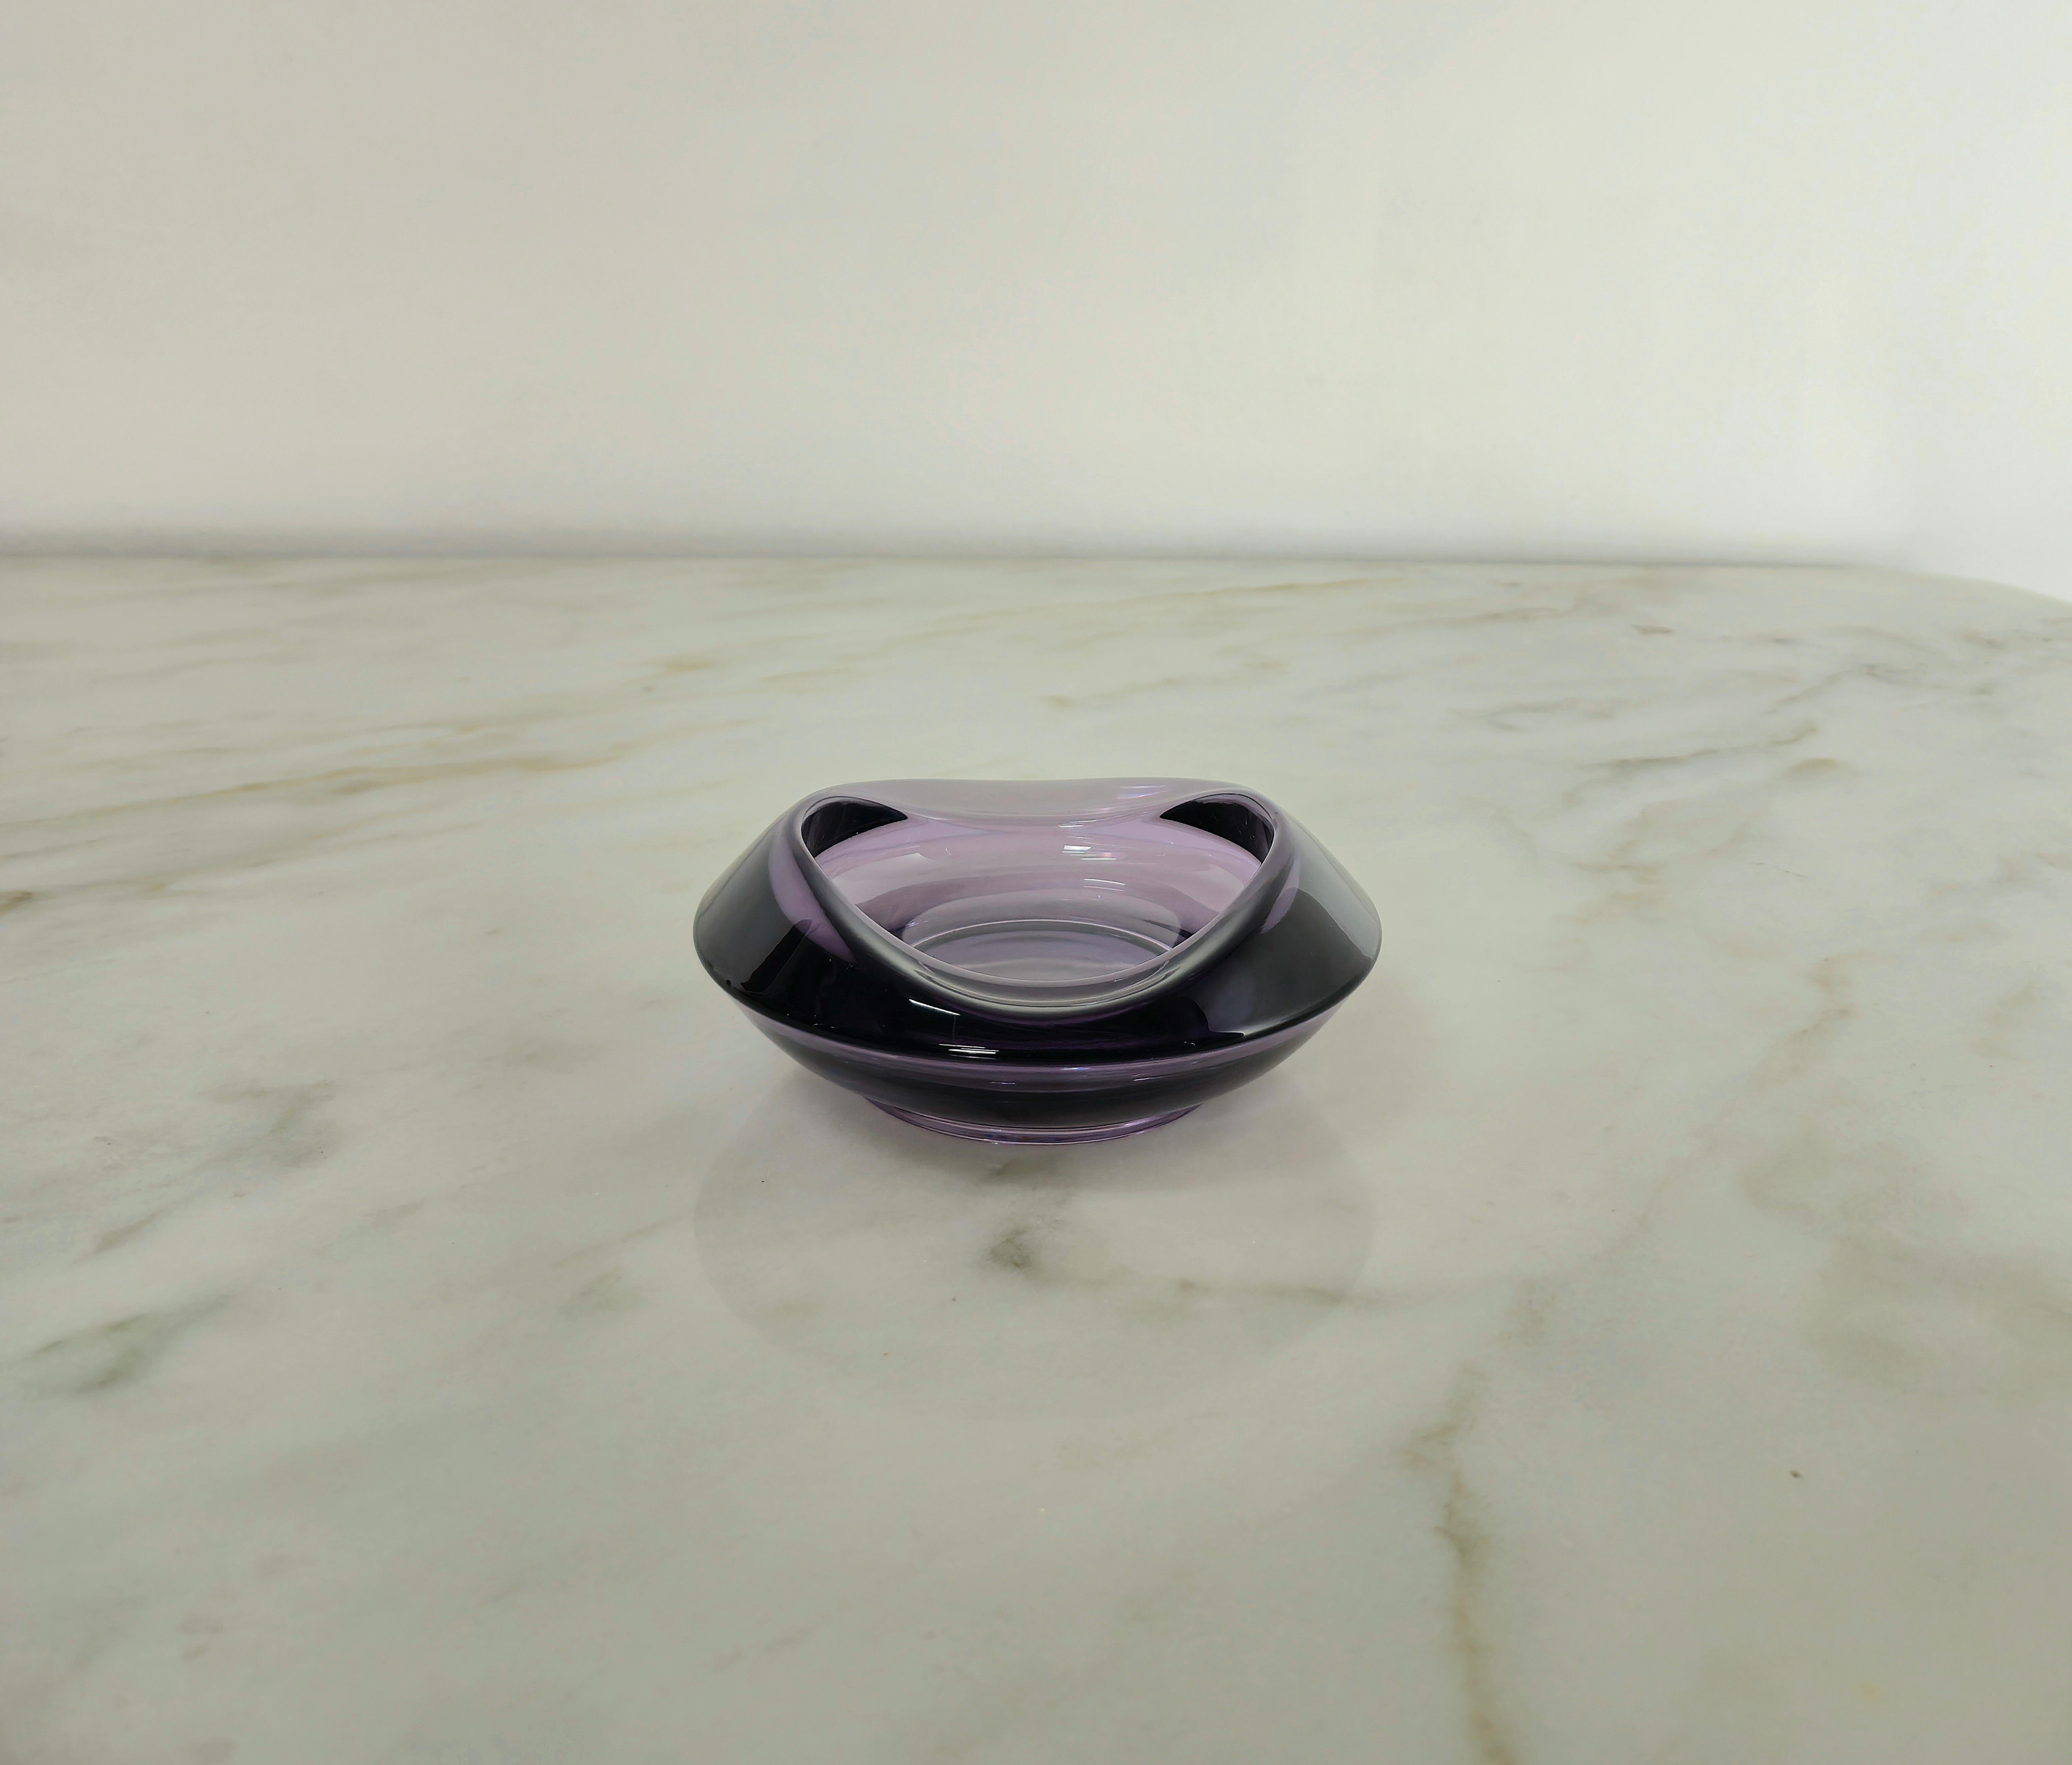 Elegant vide-poche/decorative object made of purple Murano glass with an irregularly shaped border. Made in Italy in the 1970s.